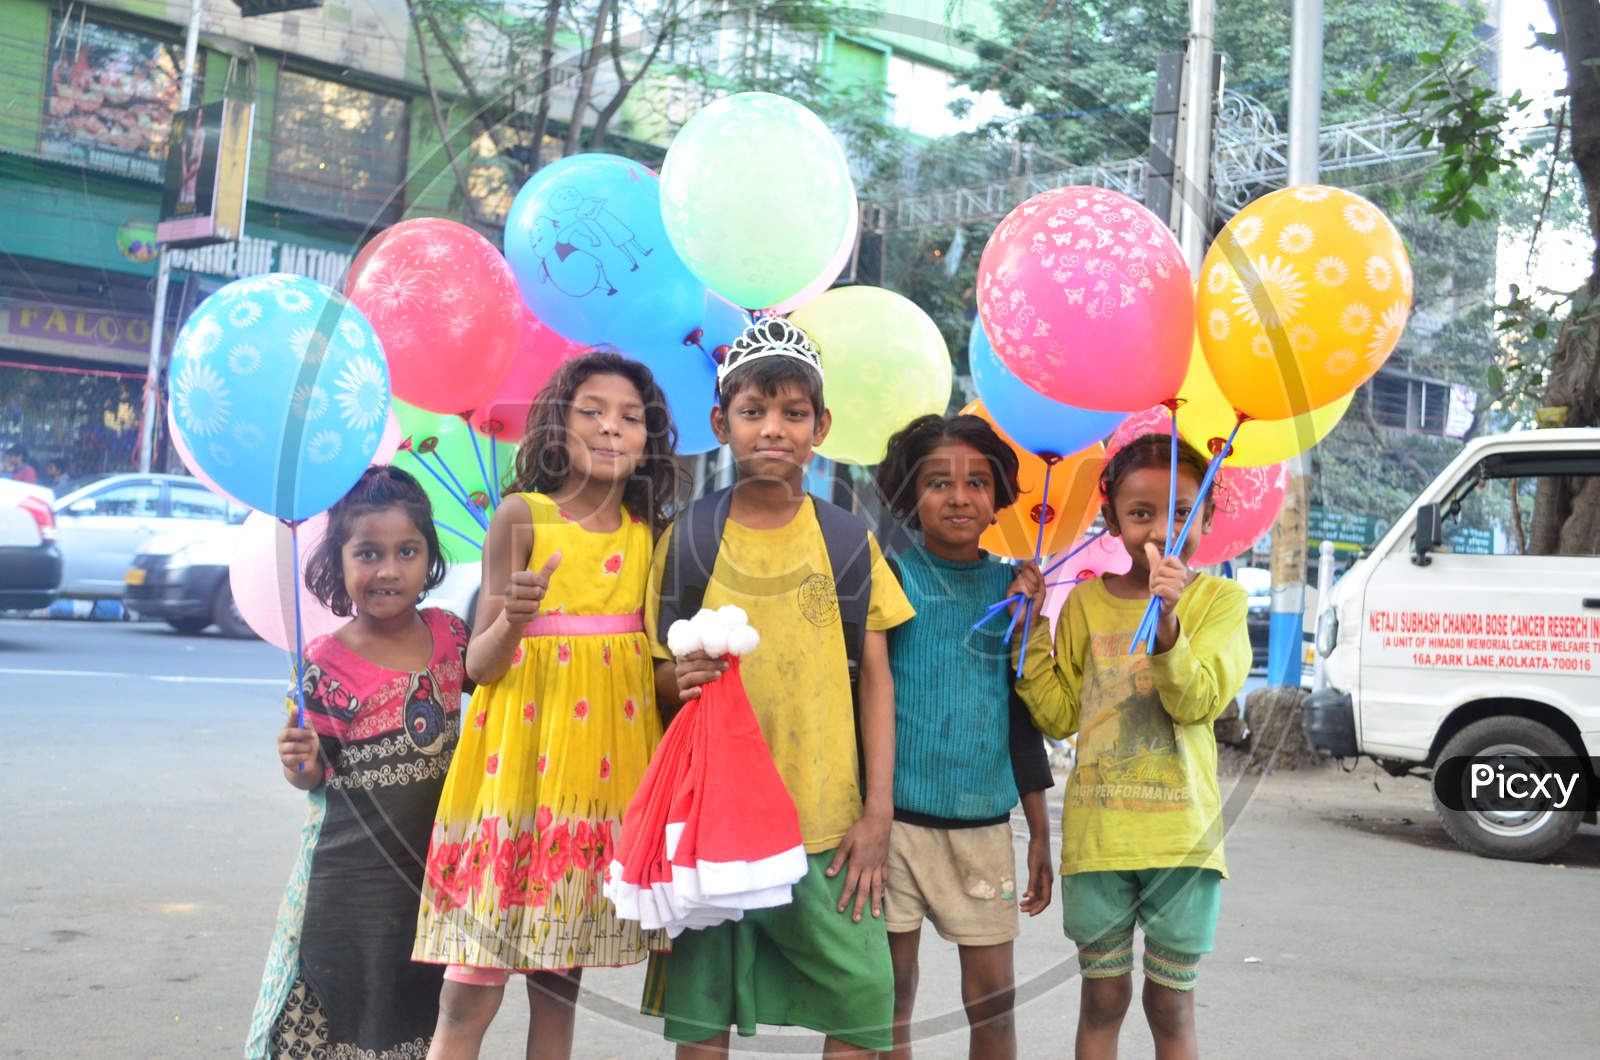 Children Vendors Of Color Balloons In Streets of India